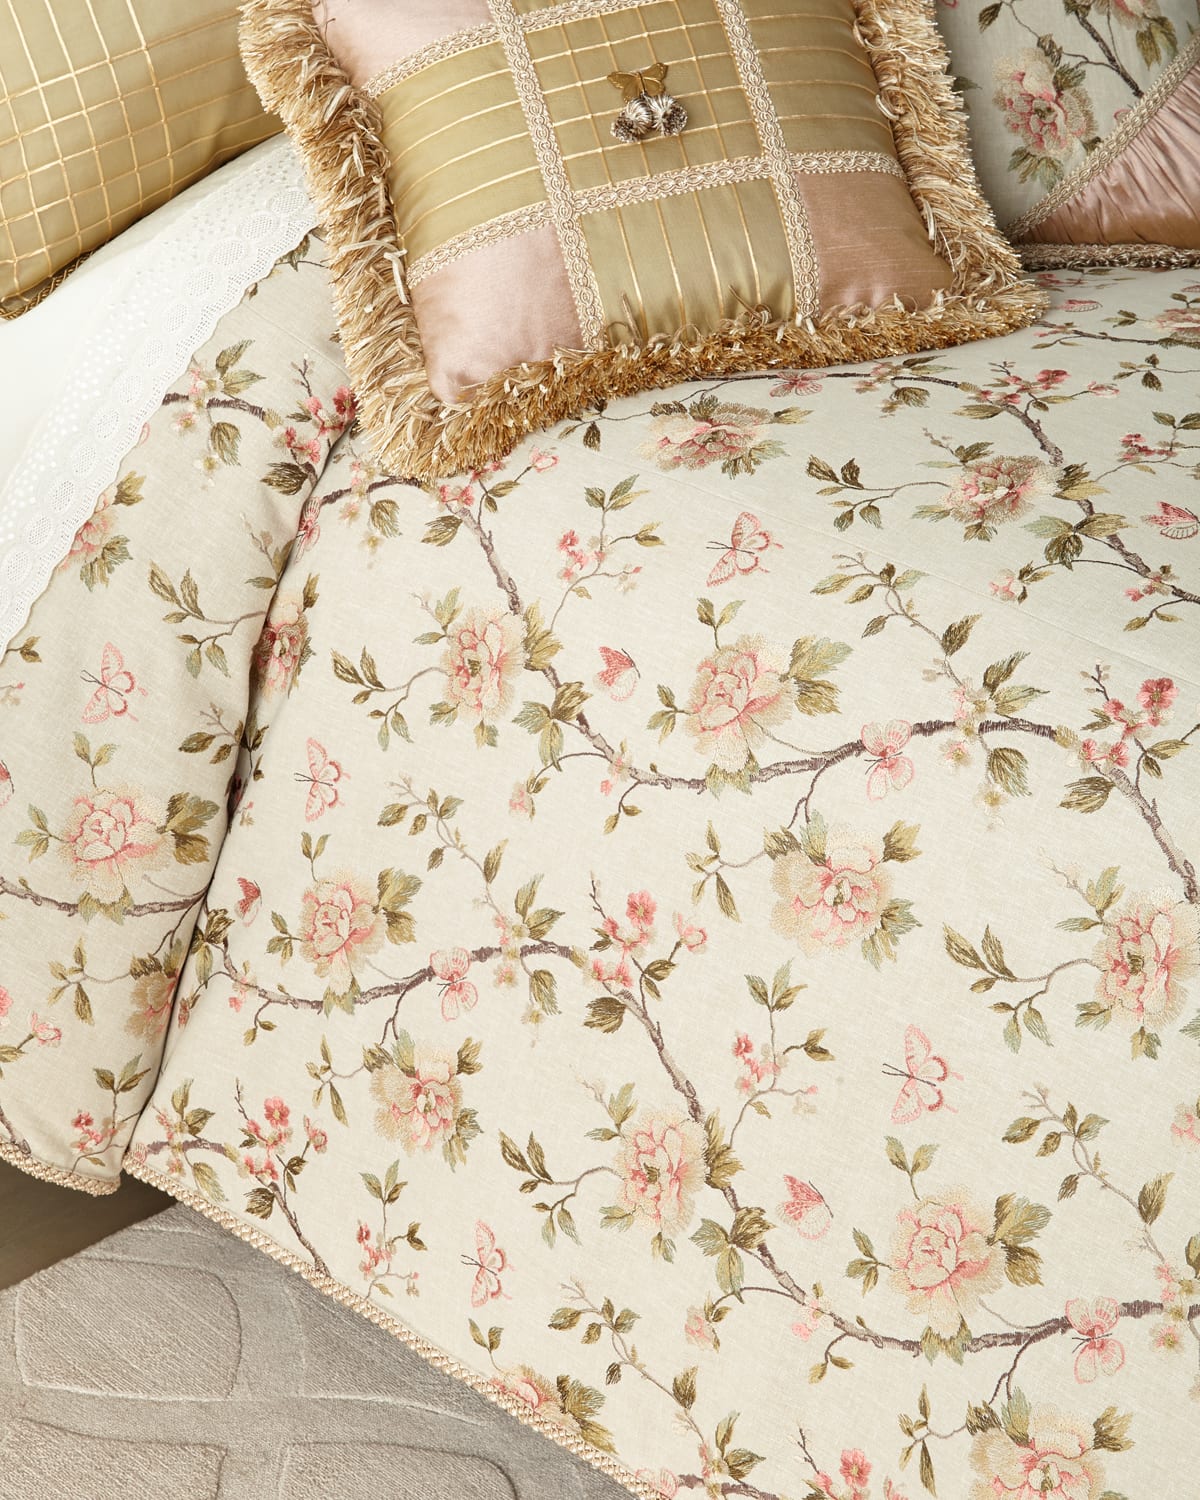 Image Sweet Dreams Delilah Embroidered Queen Duvet